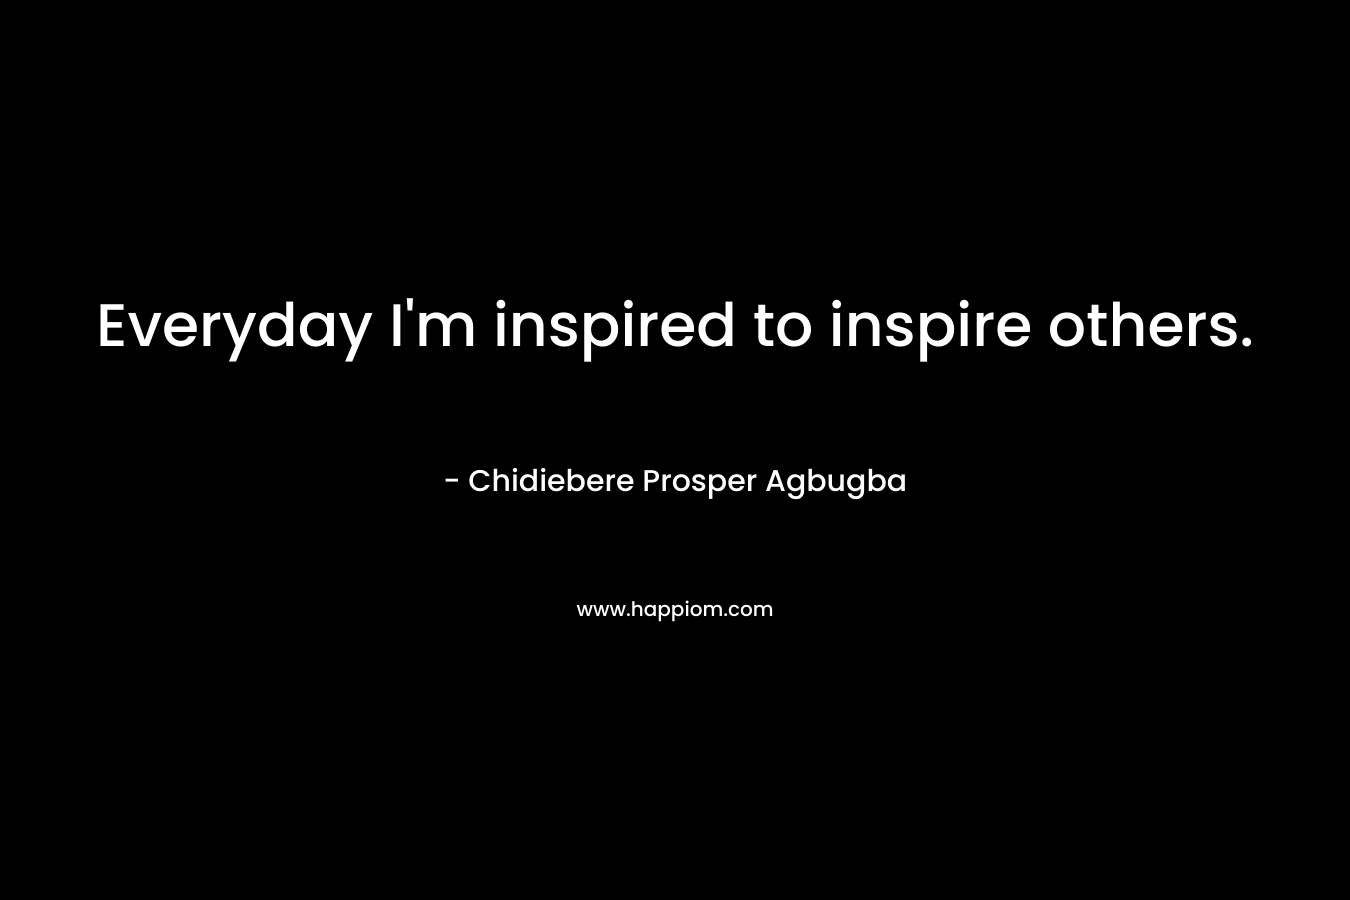 Everyday I'm inspired to inspire others.